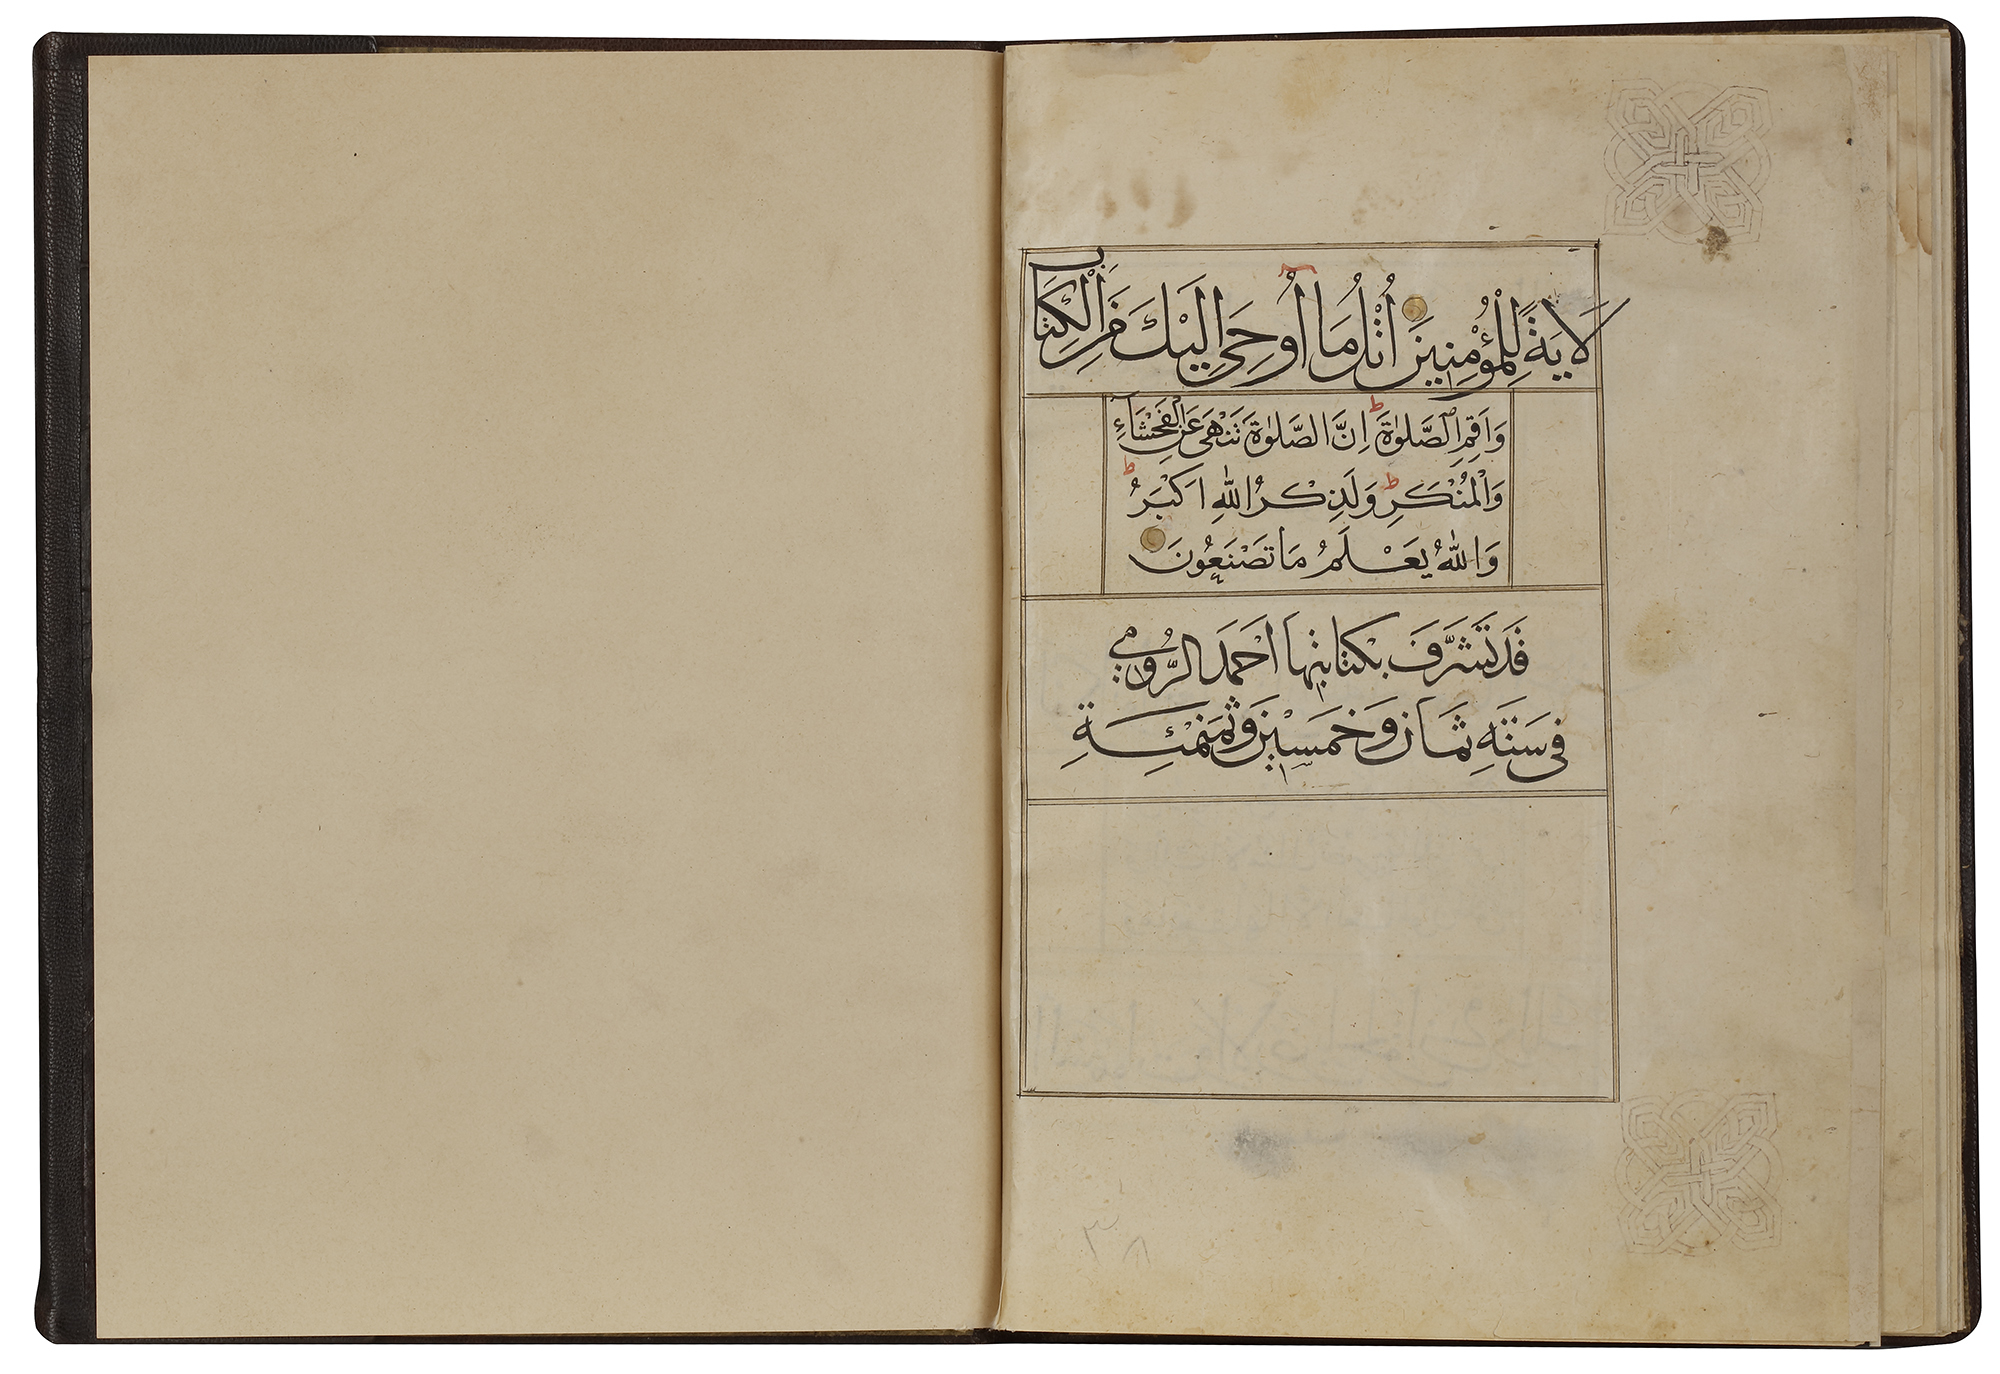 A LATE TIMURID QURAN JUZ, BY AHMED AL-RUMI IN 858 AH/1454 AD - Image 9 of 12